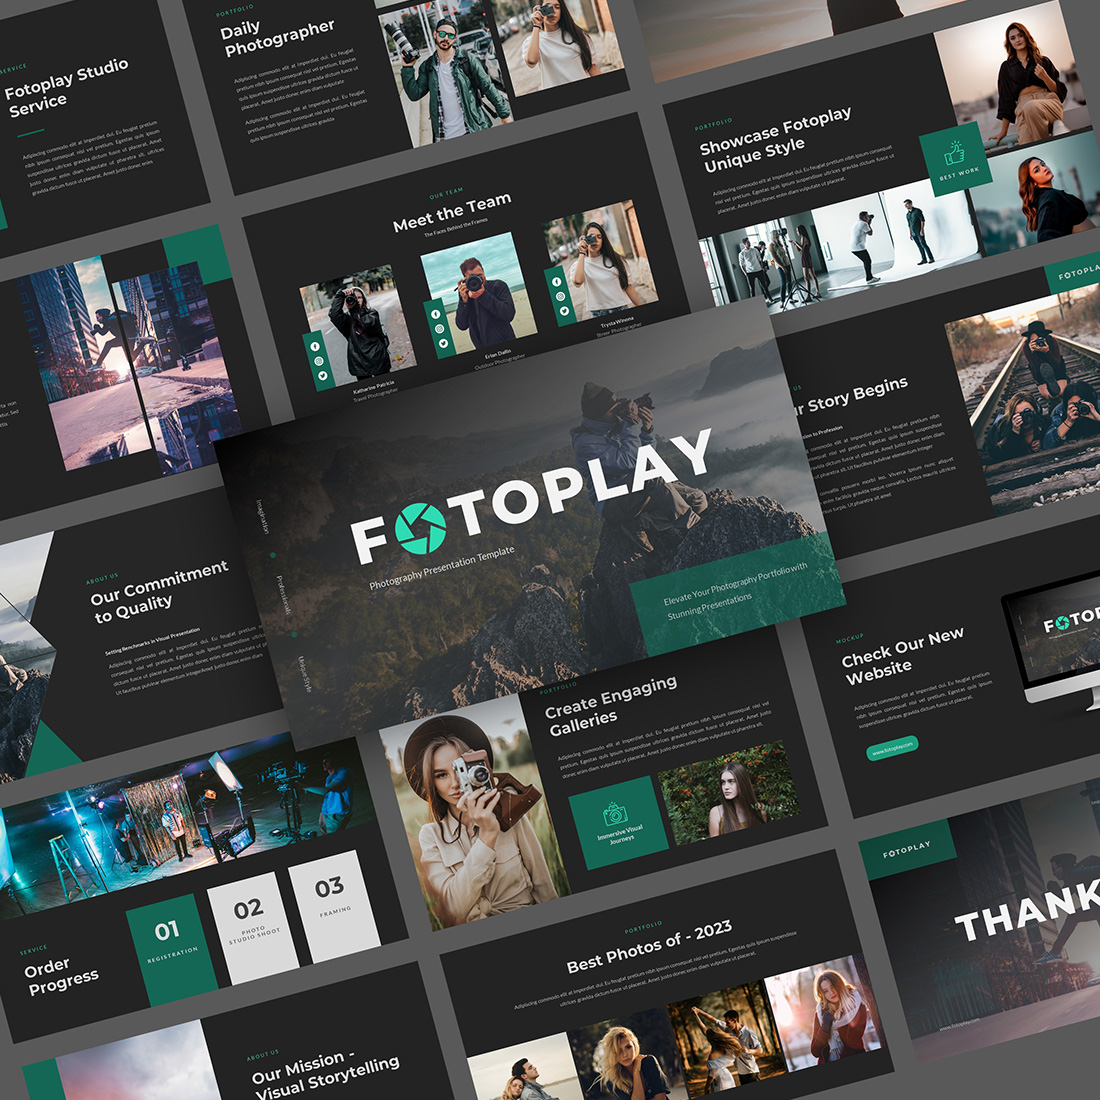 Fotoplay-Photography Keynote Template cover image.